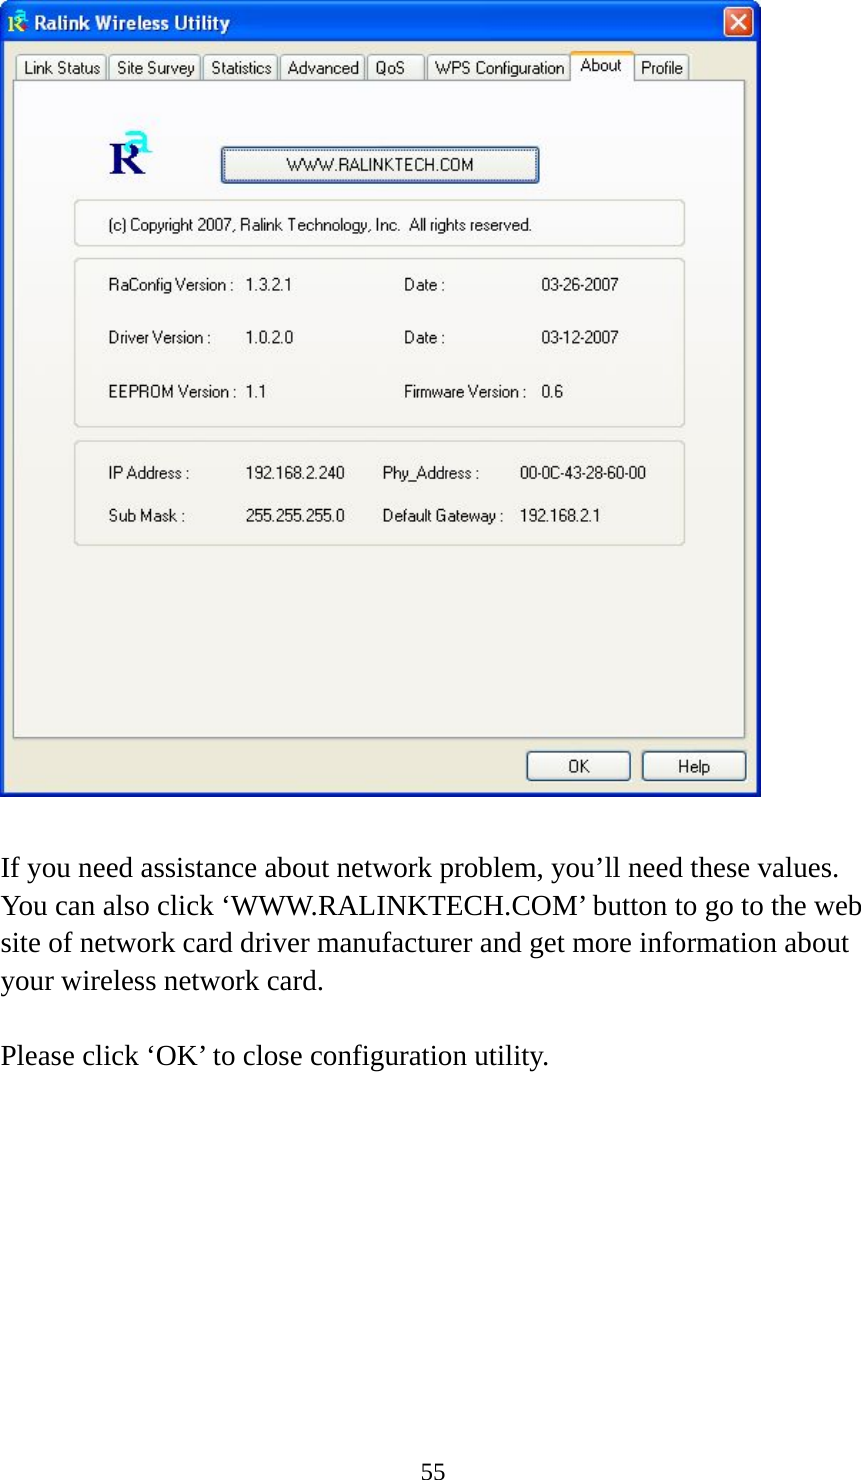  55   If you need assistance about network problem, you’ll need these values. You can also click ‘WWW.RALINKTECH.COM’ button to go to the web site of network card driver manufacturer and get more information about your wireless network card.  Please click ‘OK’ to close configuration utility. 